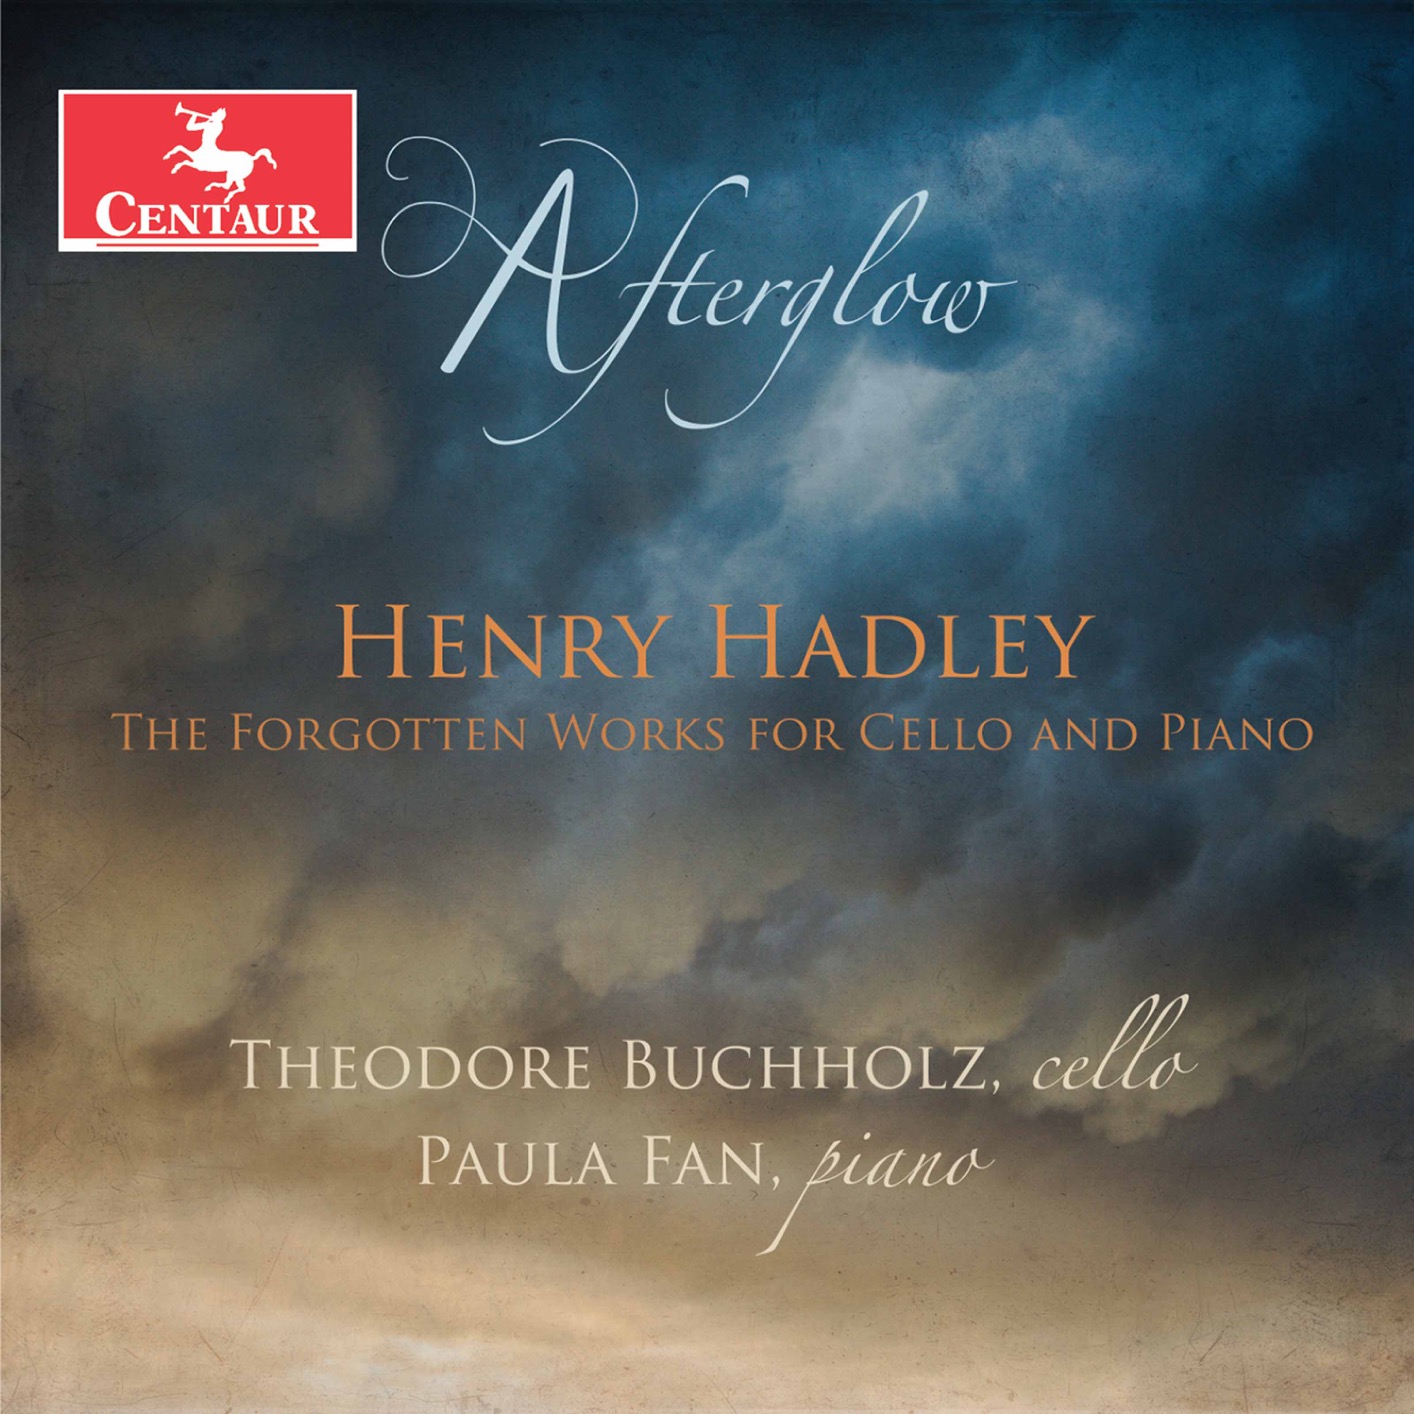 Theodore Buchholz – Afterglow – The Forgotten Works for Cello & Piano by Henry Hadley (2020) [FLAC 24bit/96kHz]